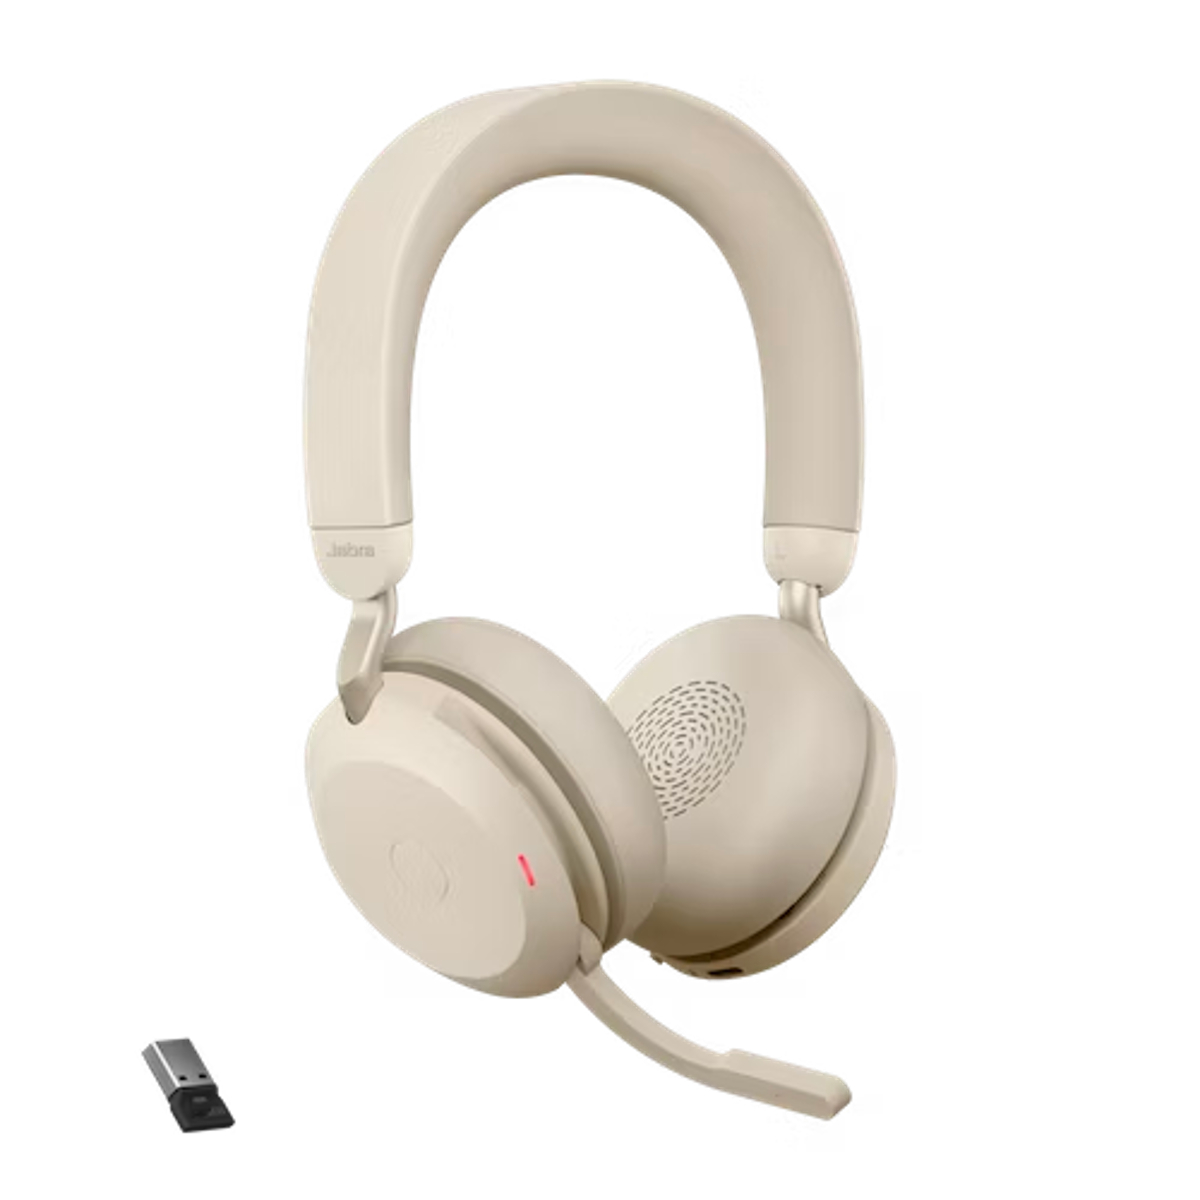 Macondo Networks | Jabra Evolve2 | Headset Bluetooth UC 380A Stereo USB-A Adapter |Beige With (27599-989-998) Link 75